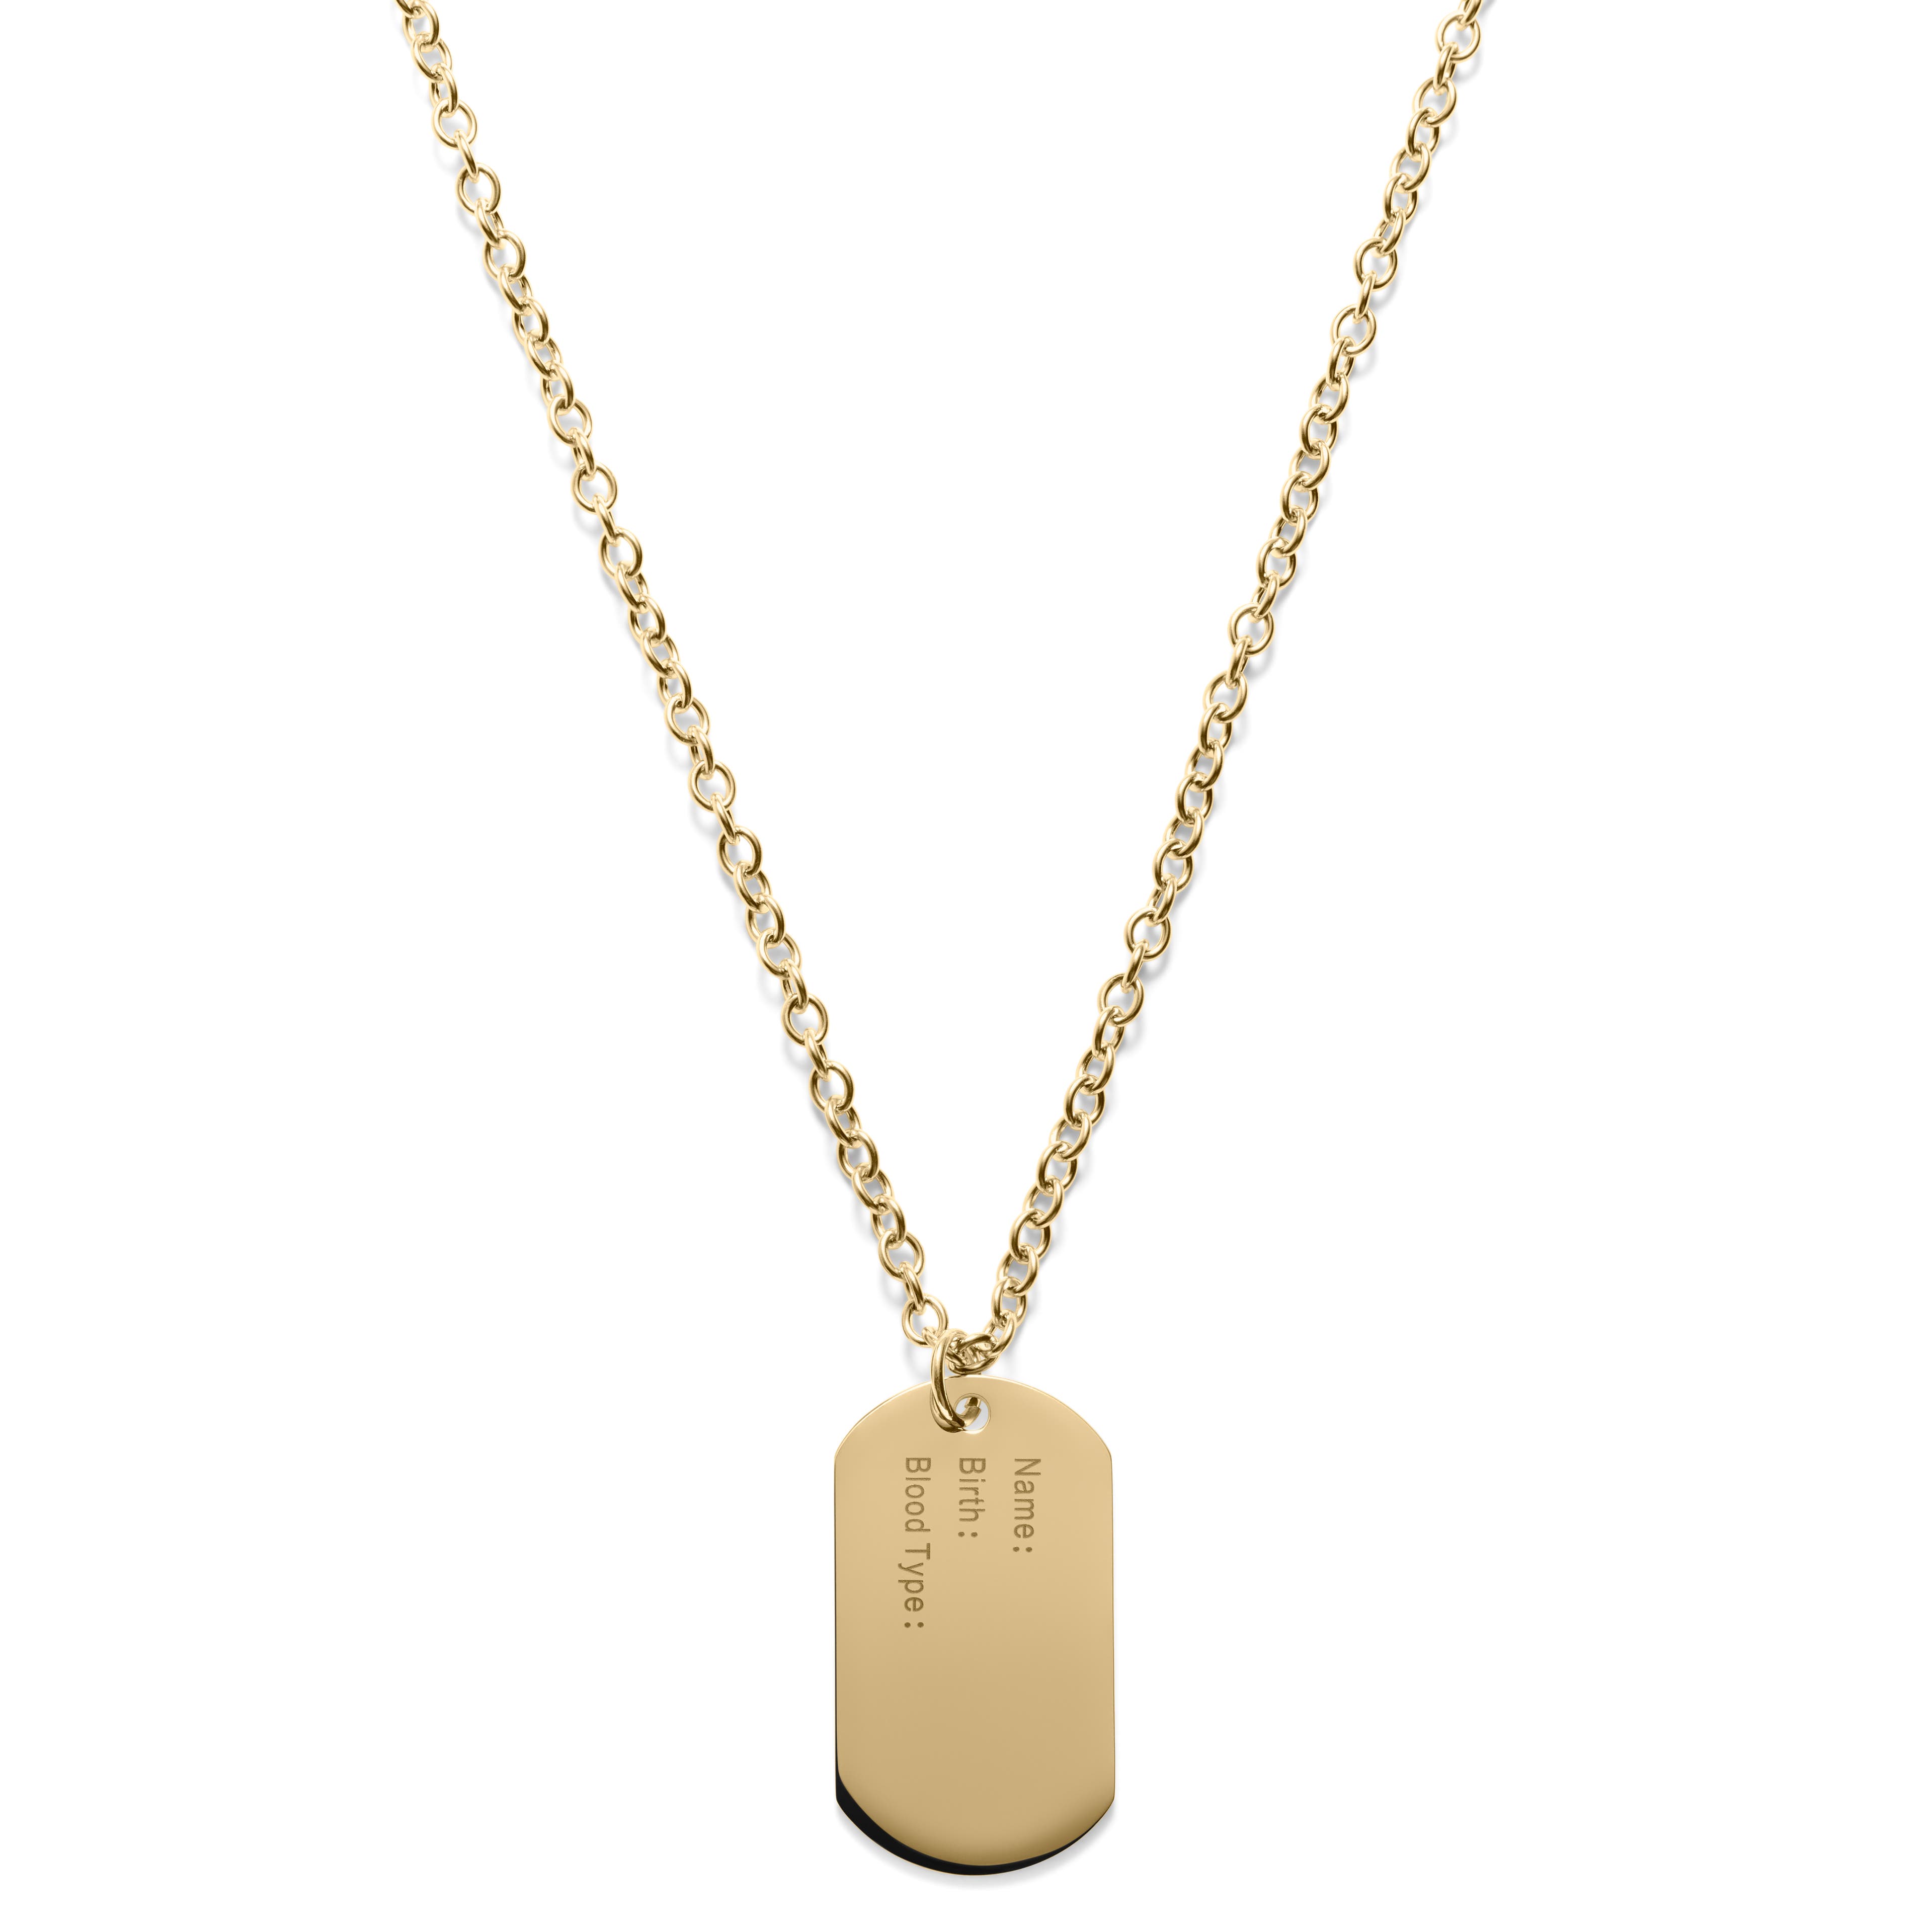 Gold-Tone Dog Tag Cable Chain Necklace